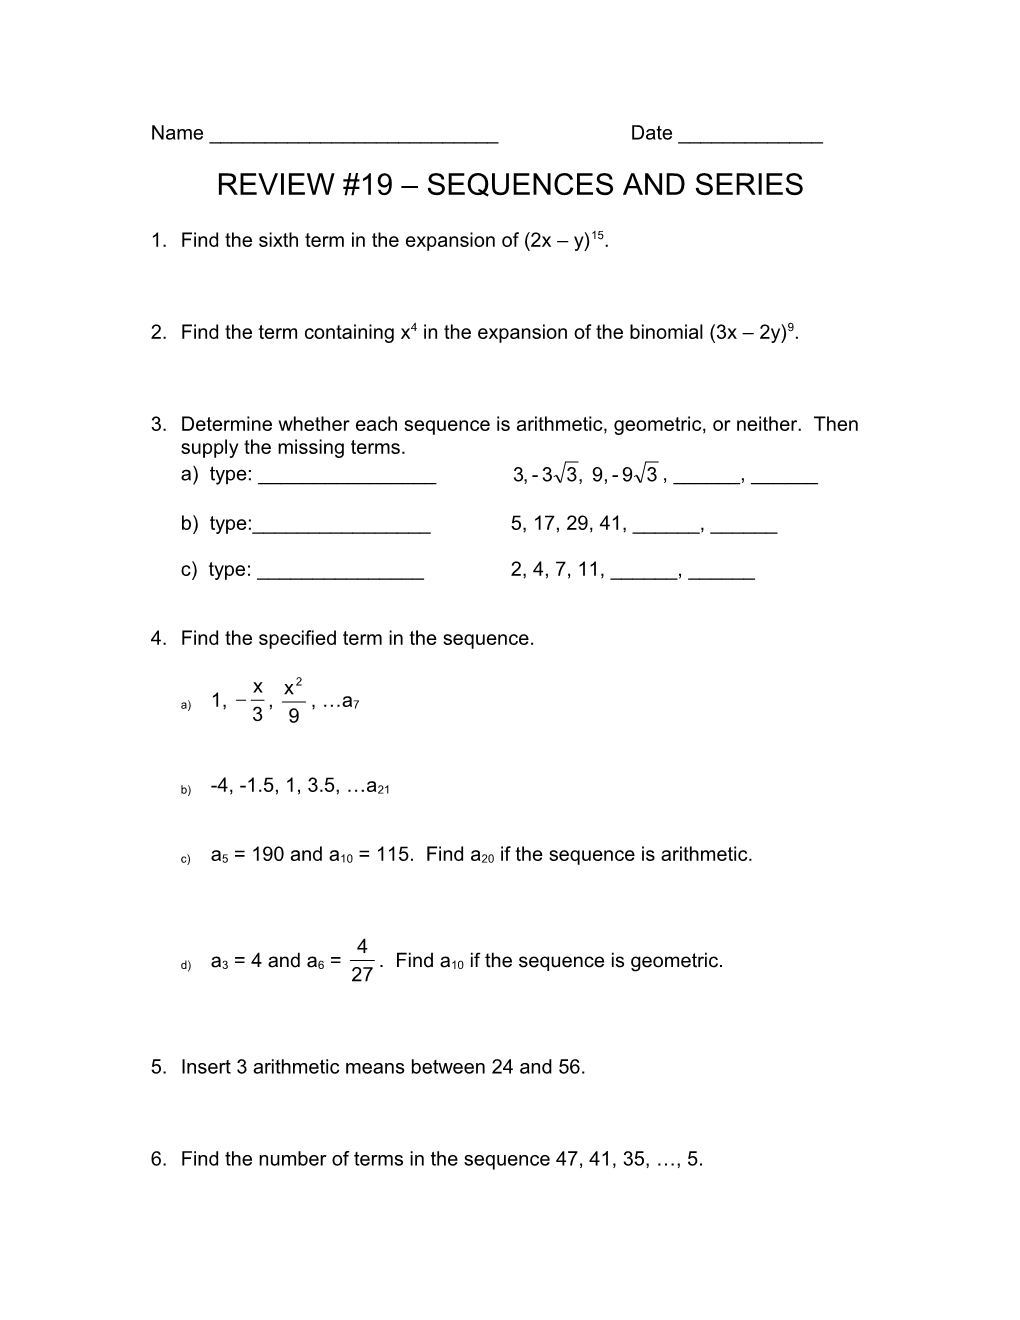 Review #19 Sequences and Series